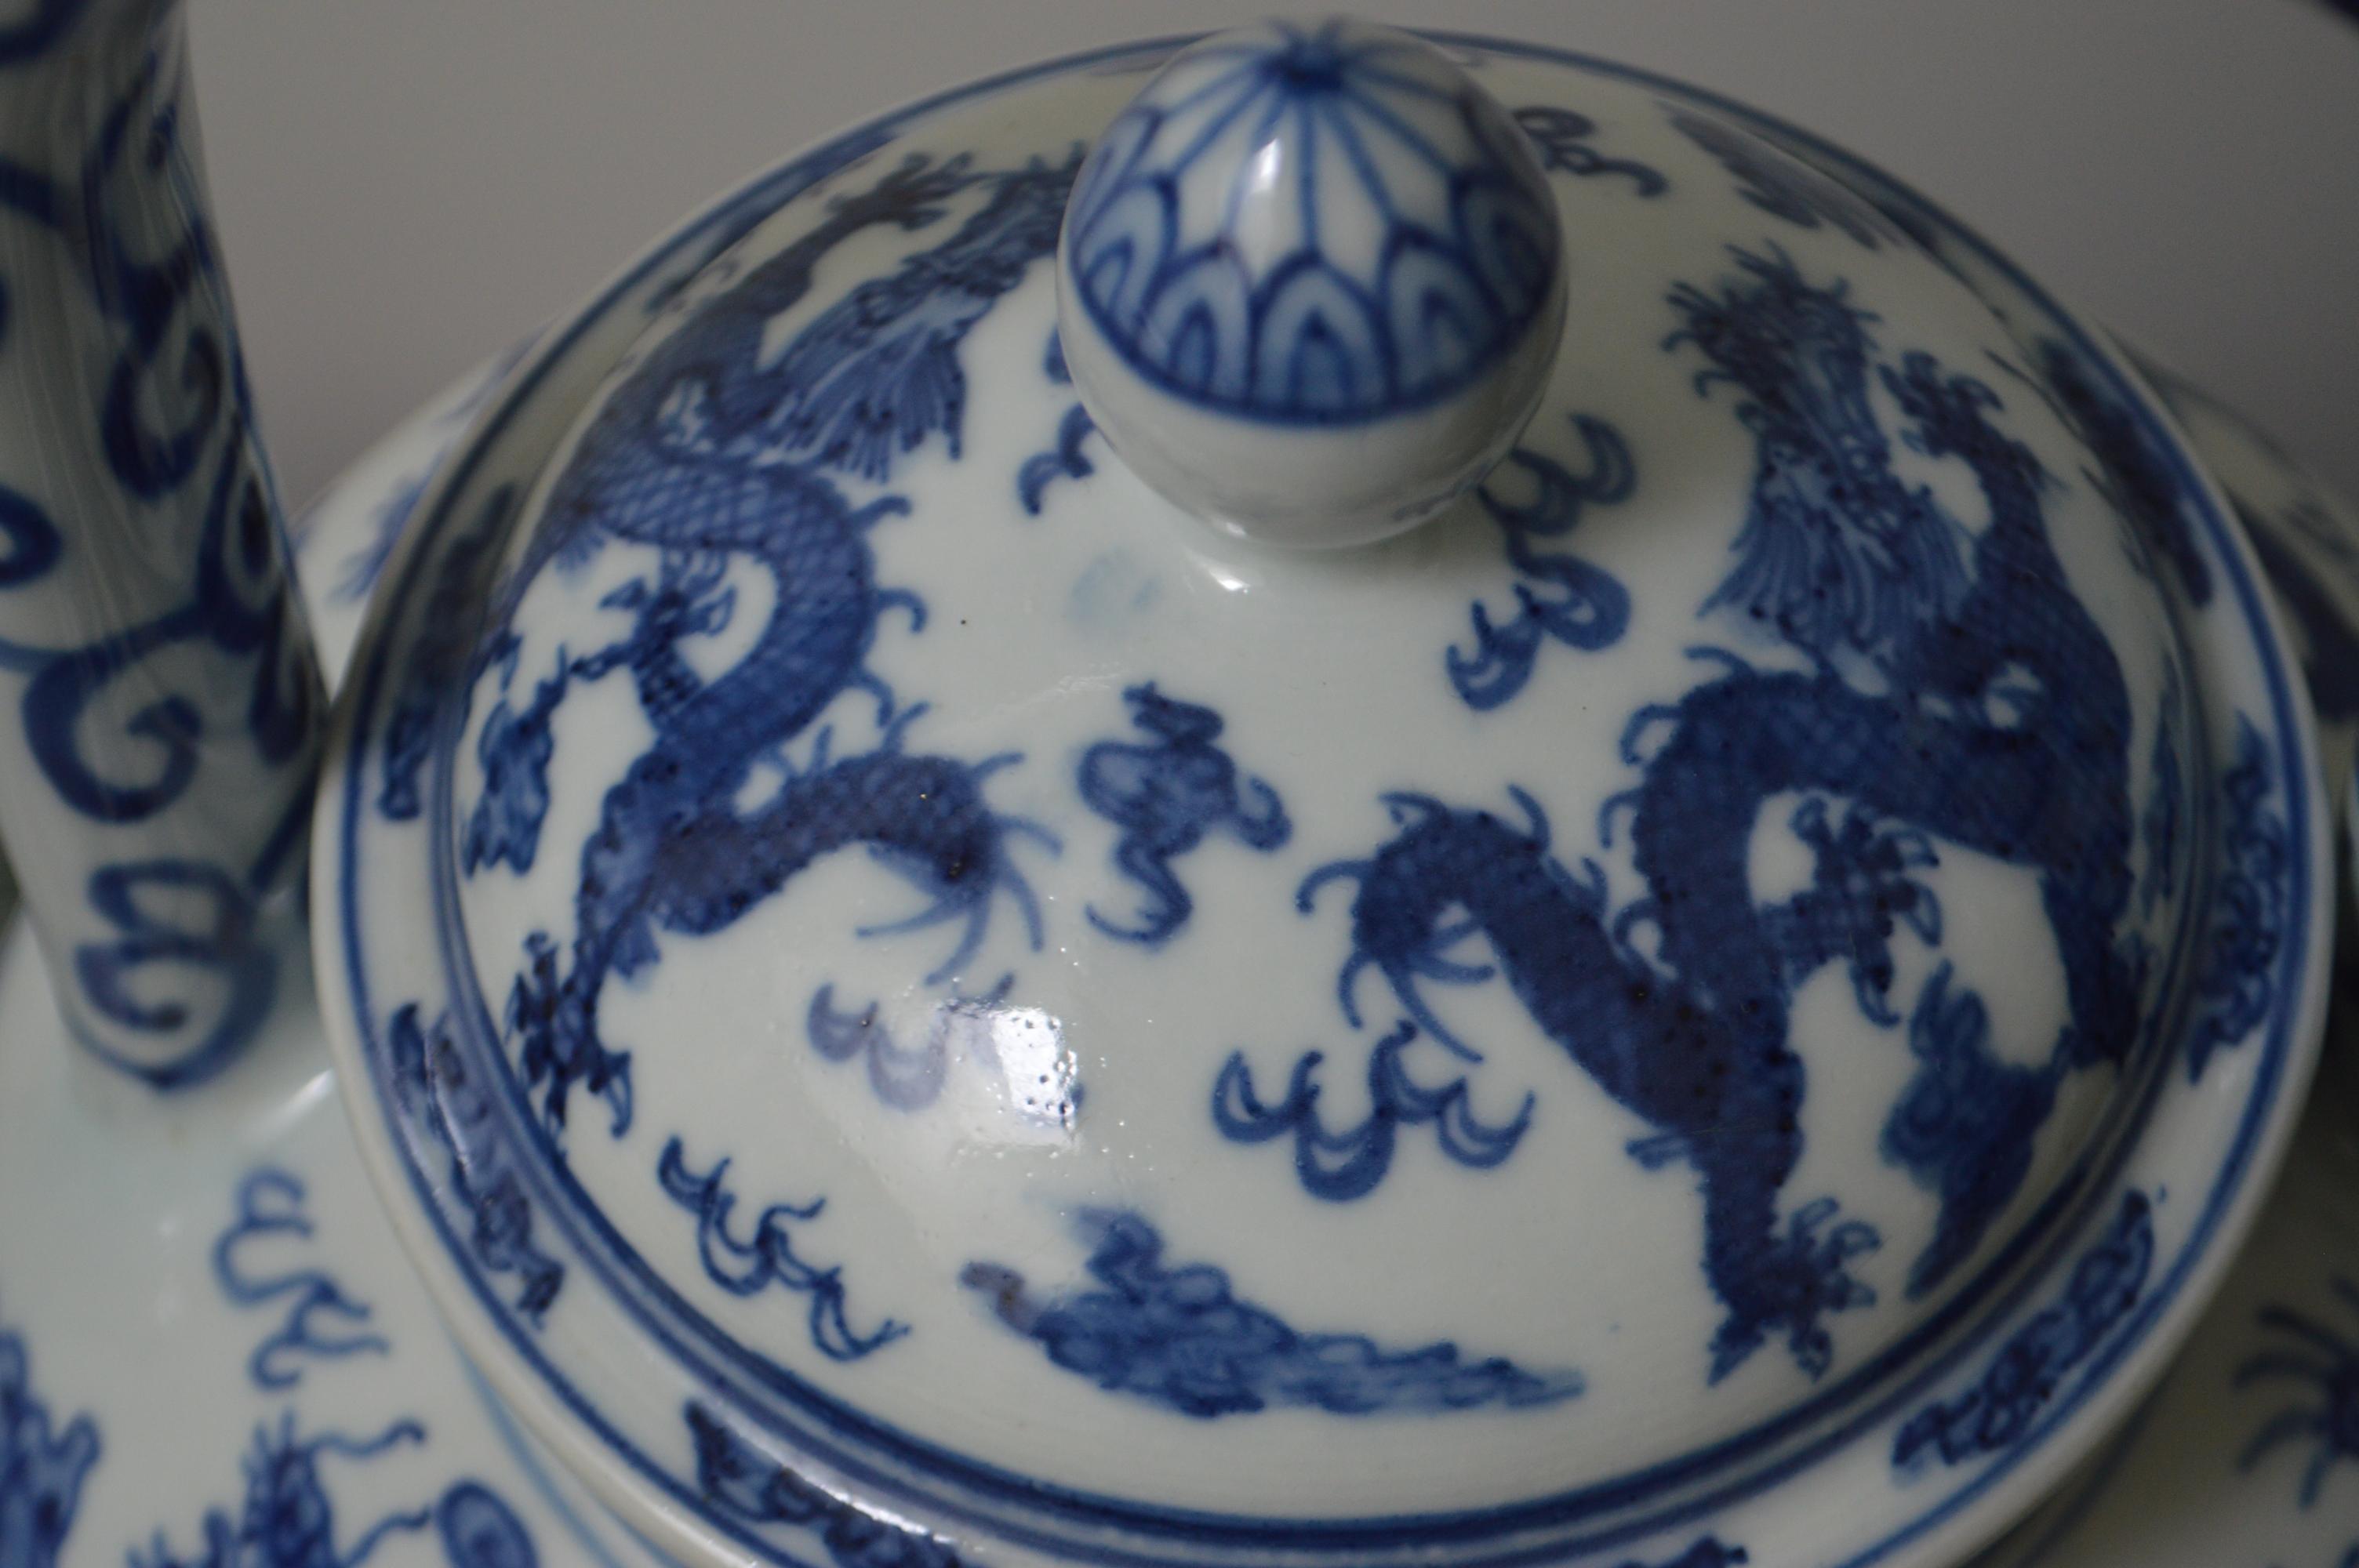 A large blue and white porcelain tea pot with large top handle, lid and dragon motif. It also has an Apocryphal Longging mark on the bottom. Excellent condition.